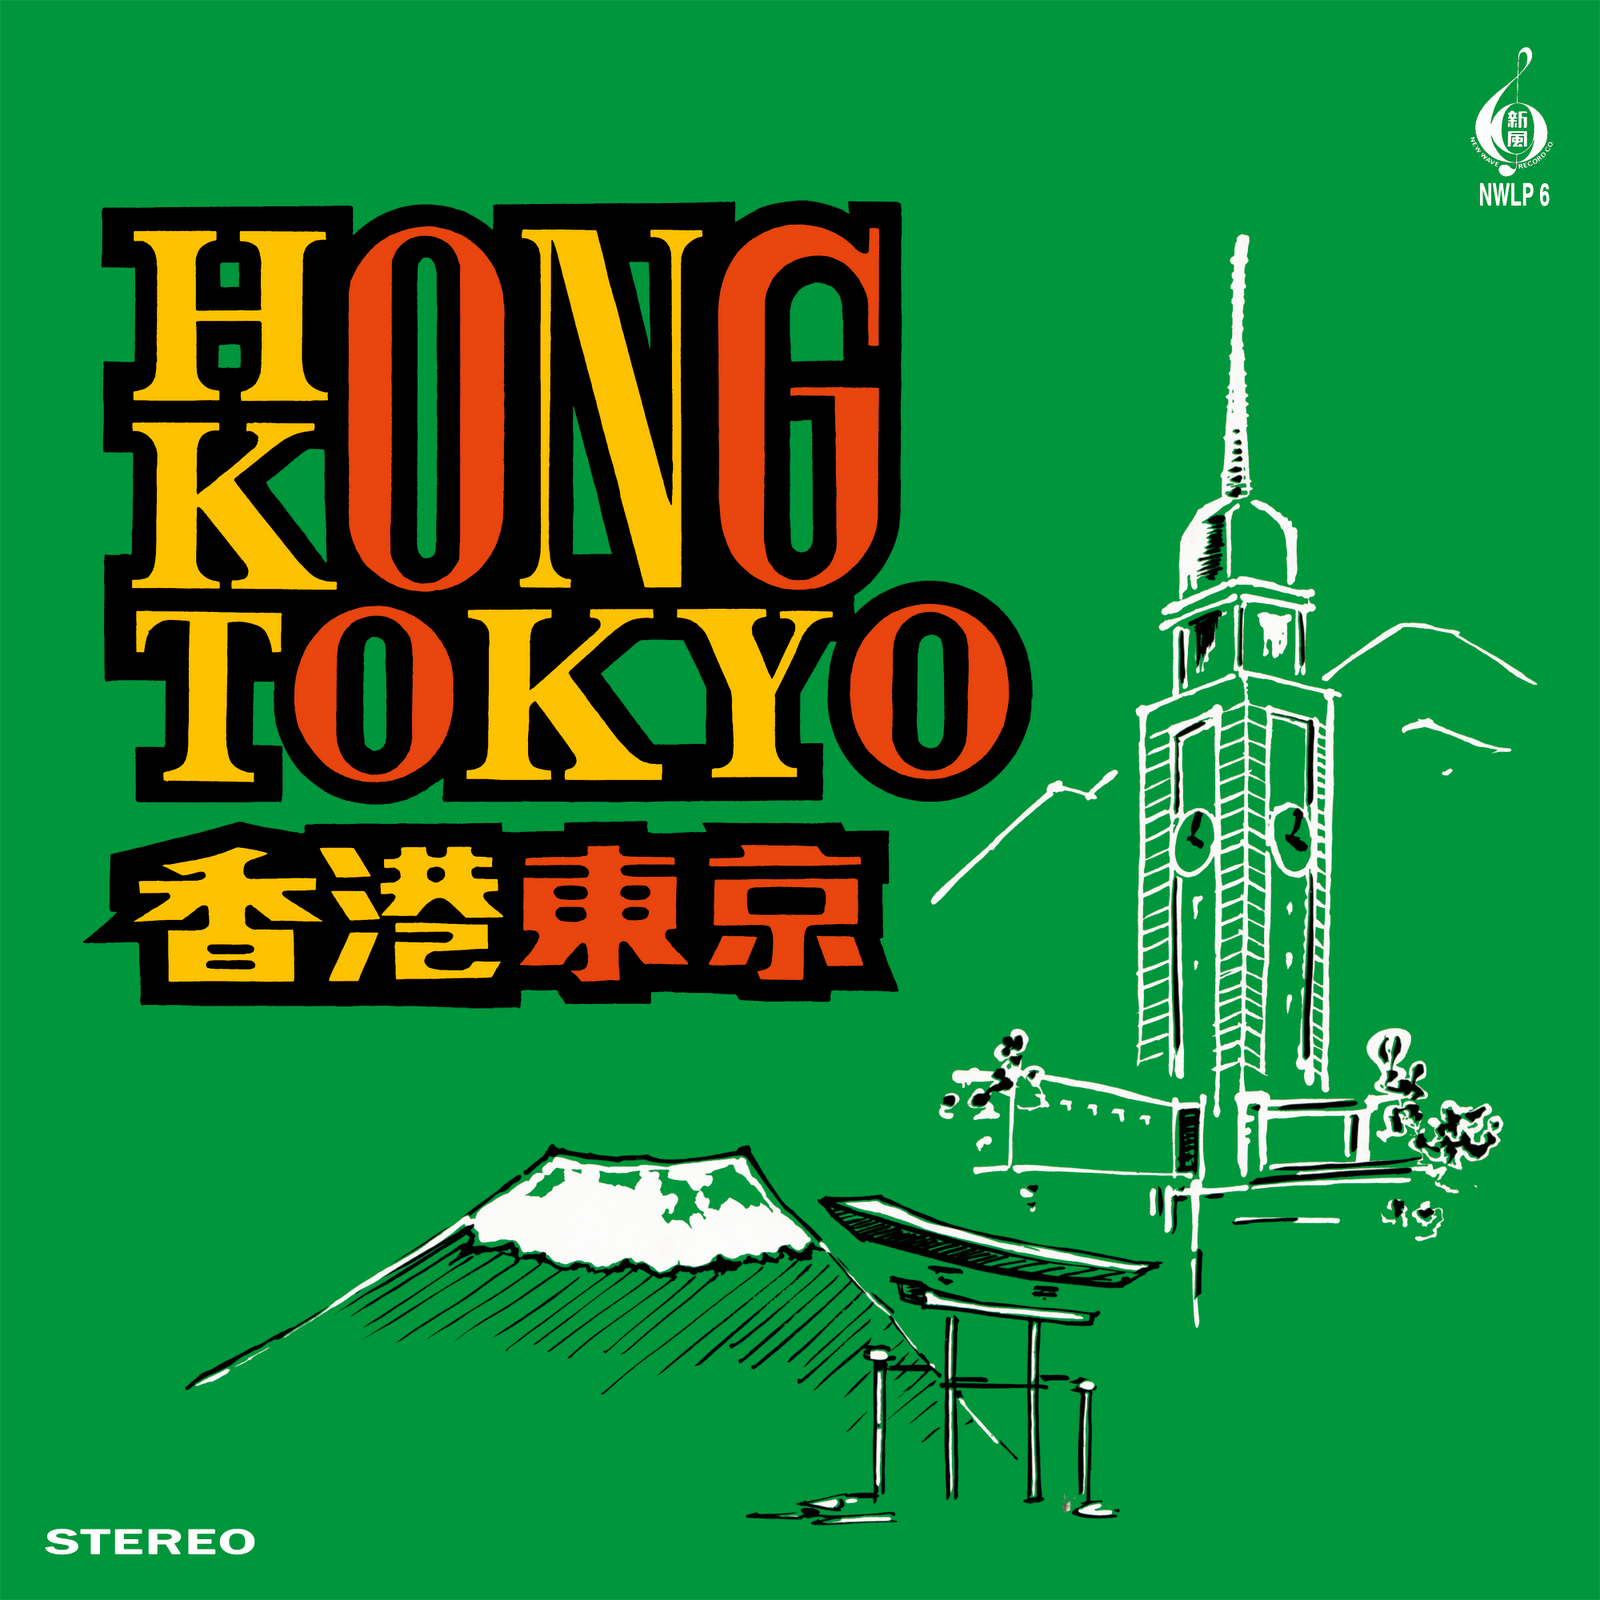 Oscar+Young+with+The+Electric+Organ+Orchestra+-+Hong+Kong+Tokyo+-+Front+Cover+Reconstruction.png